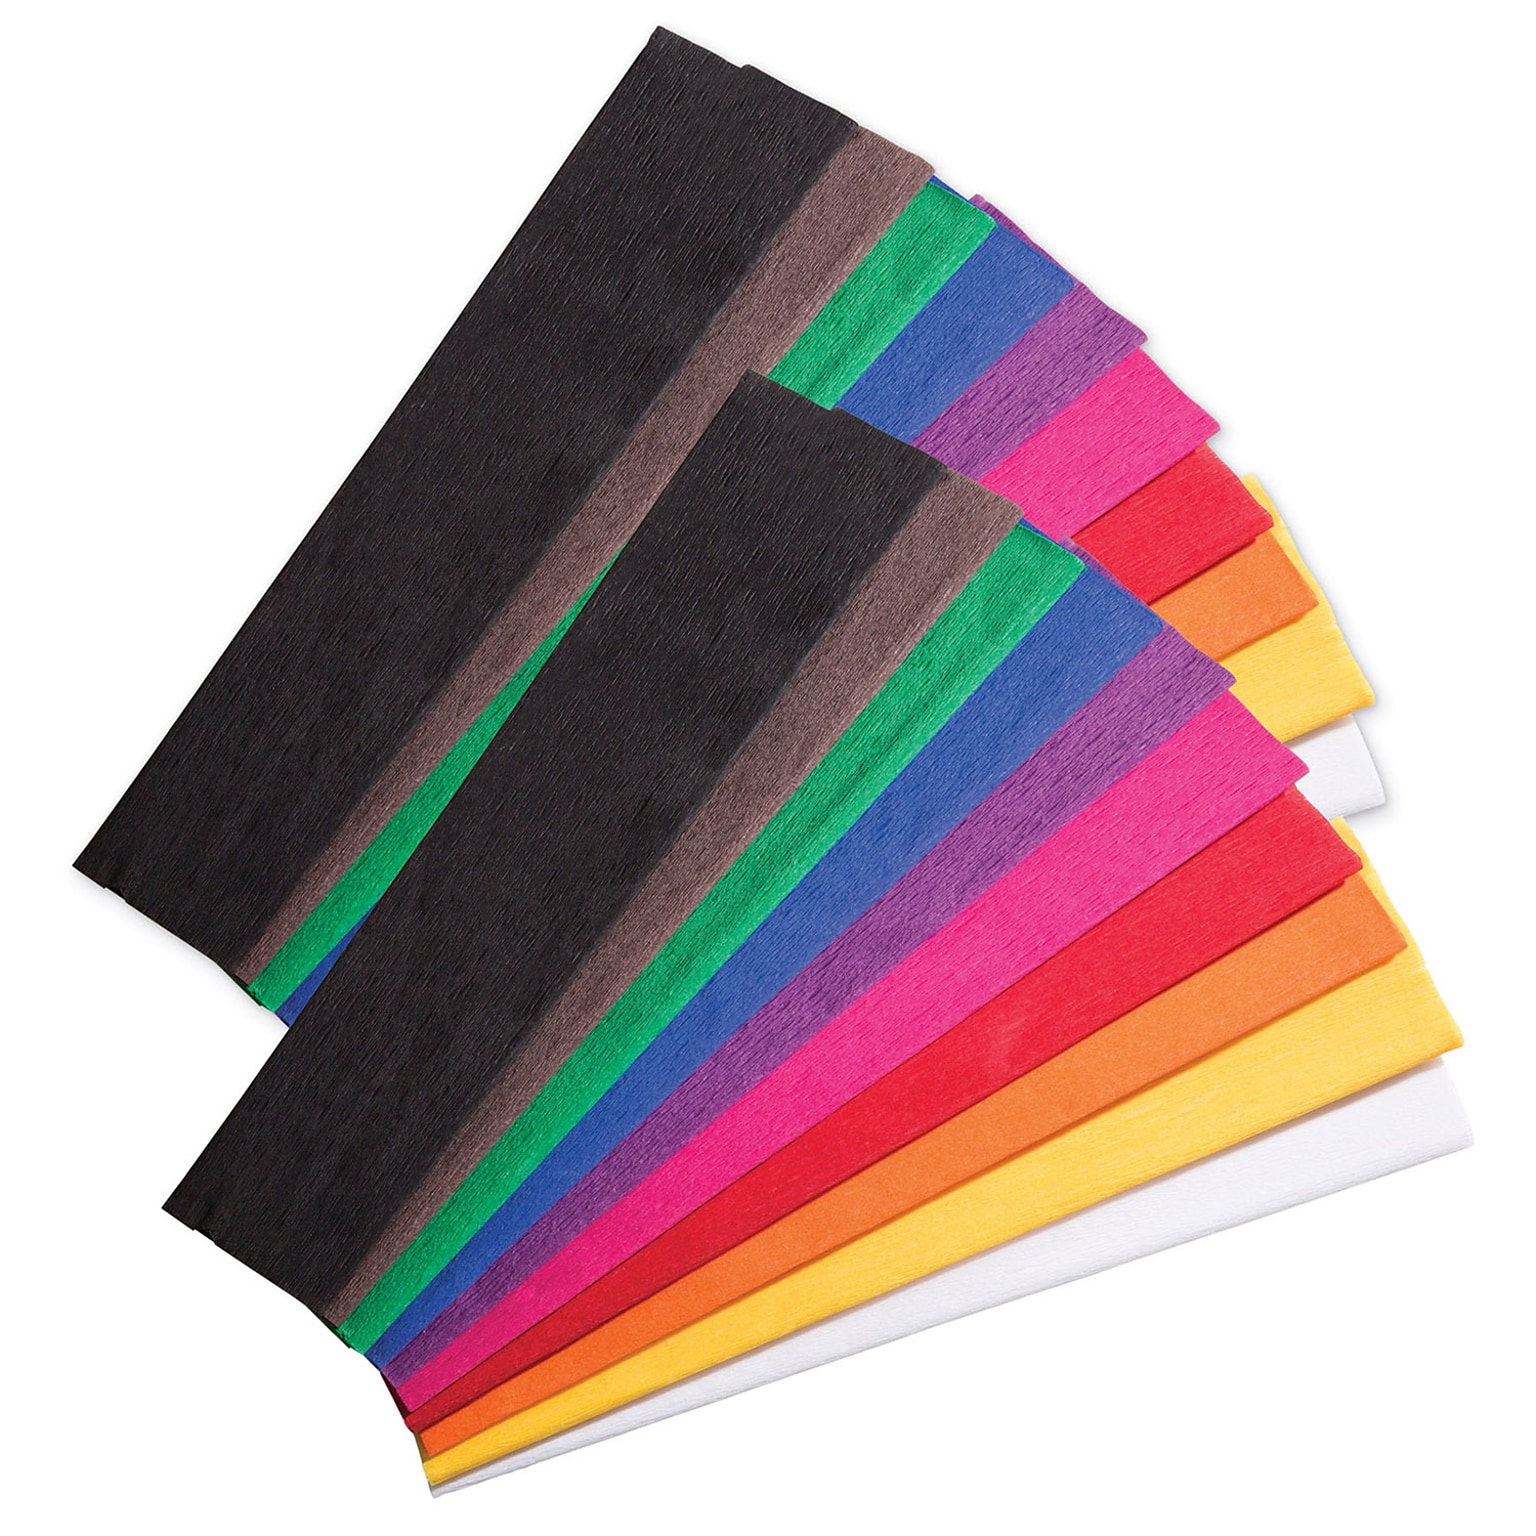 Creativity Street Crepe Paper, 10 Assorted Colors, 20 x 7-1/2, 10 Sheets/Pack, 2 Packs (PACAC10250-2)